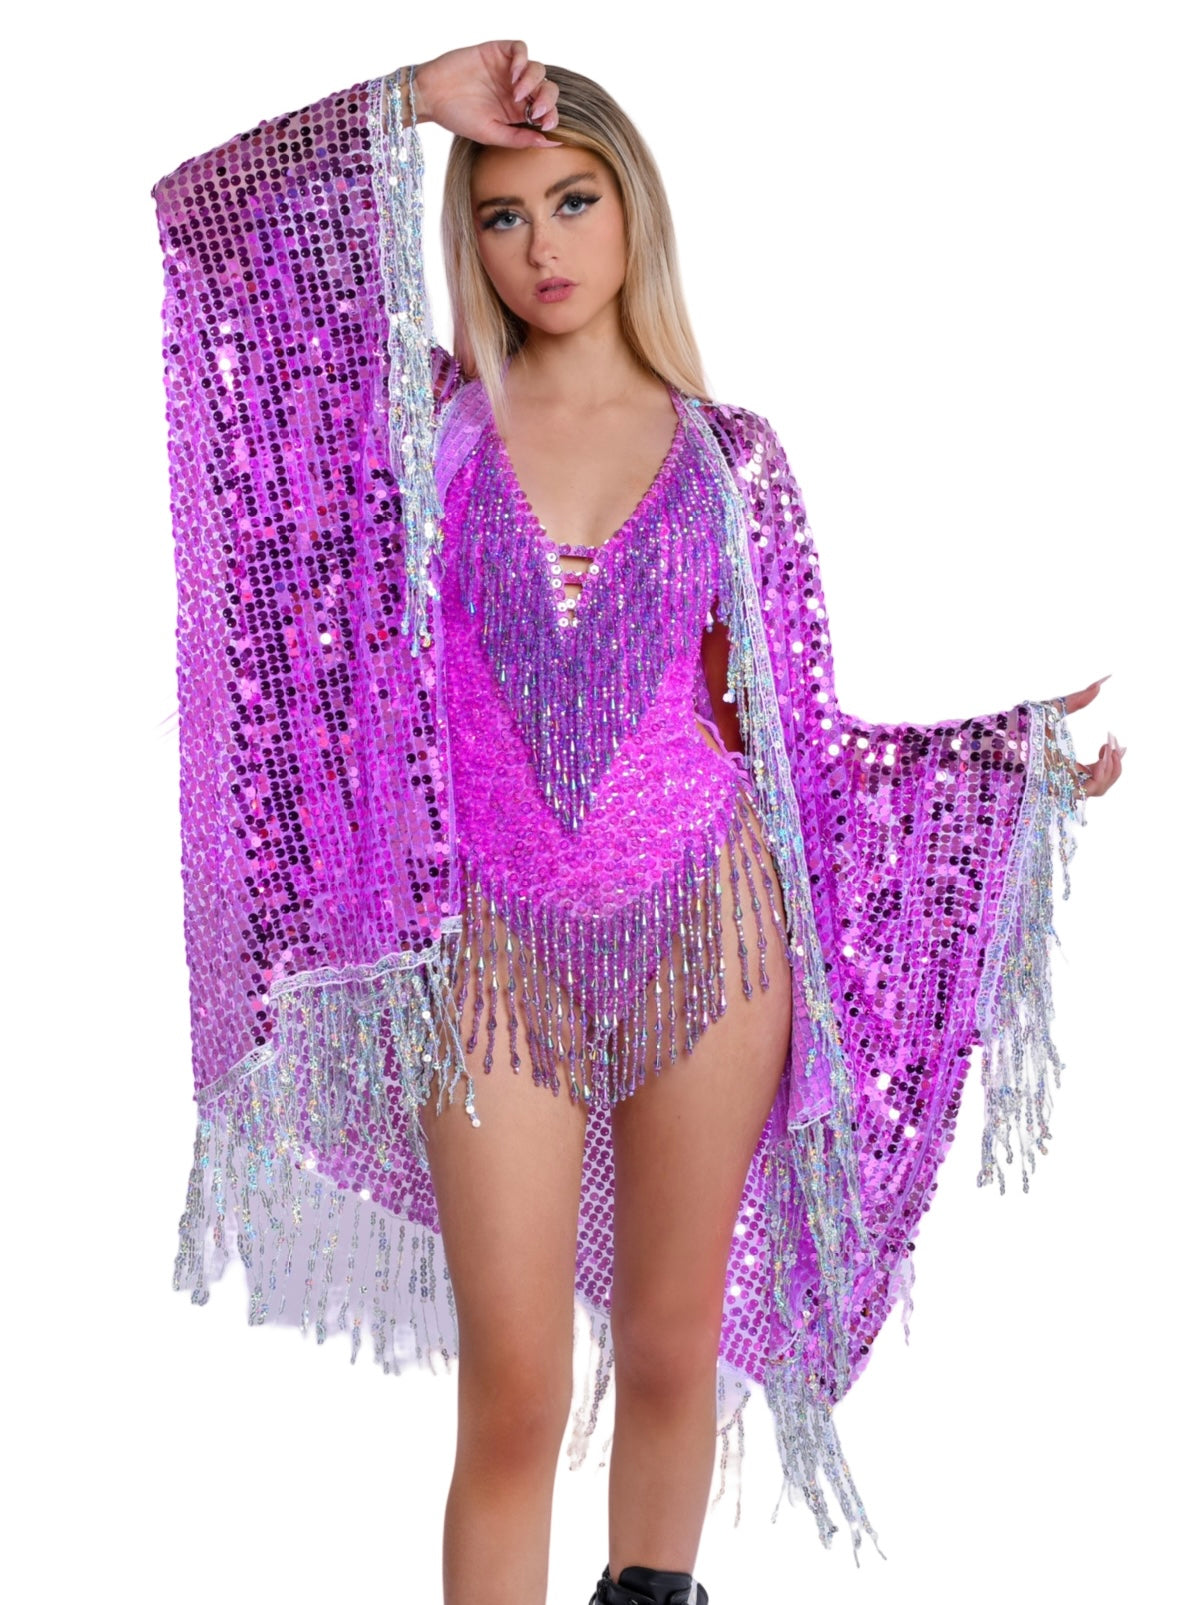 FULL OUTFIT- Purple Disco